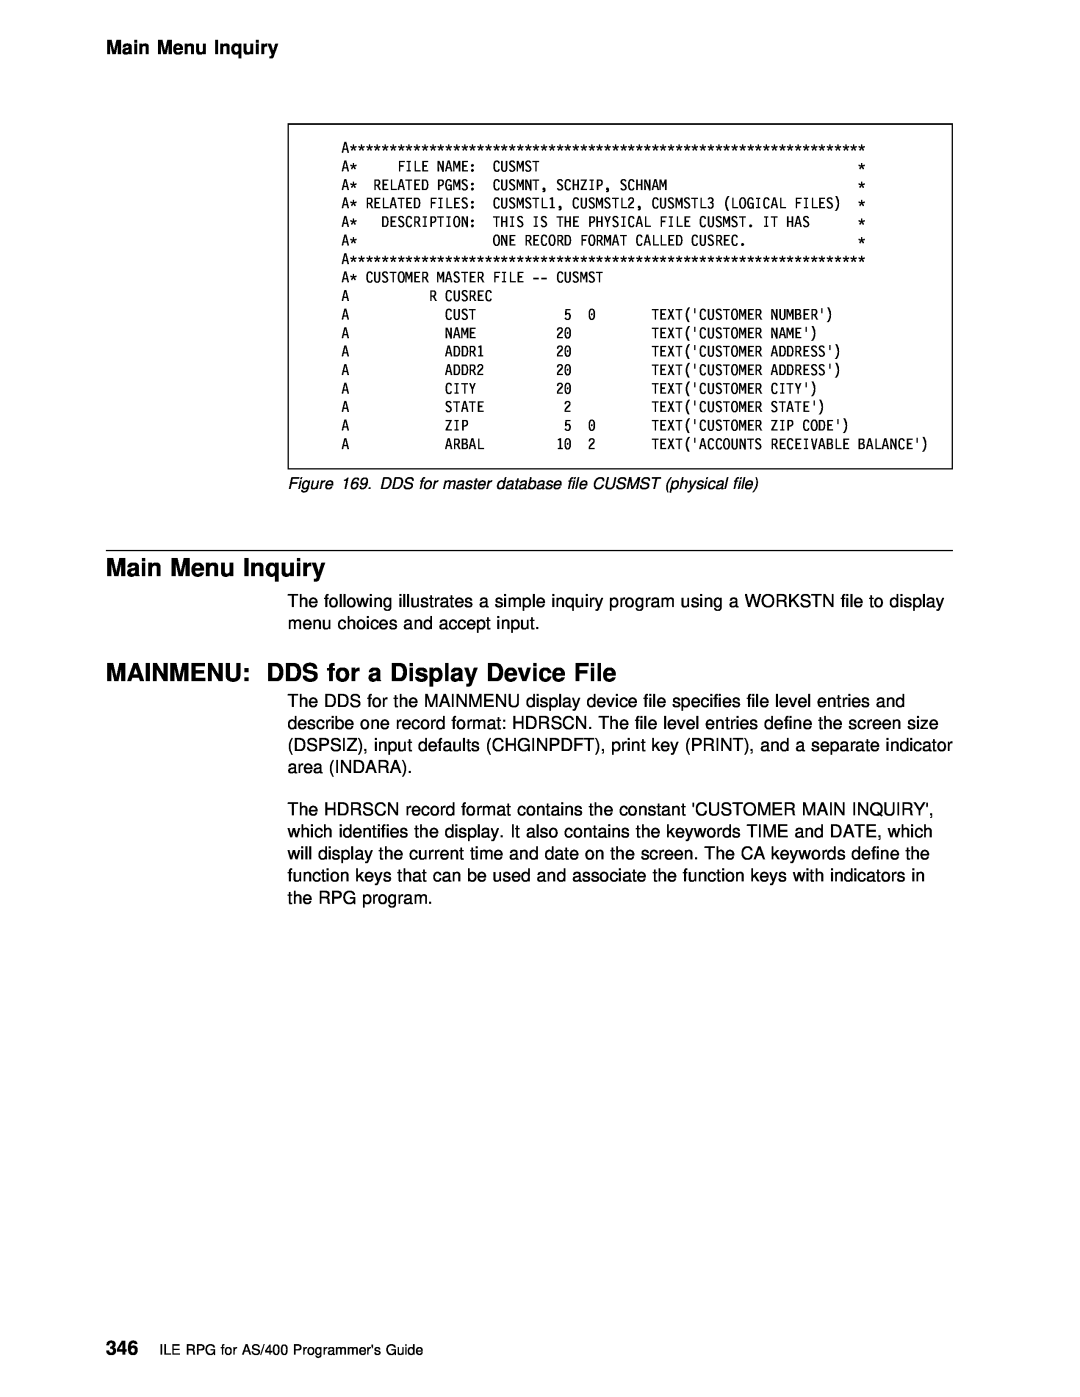 IBM AS/400 manual DDS for a, Display Device, Main Menu Inquiry, File 